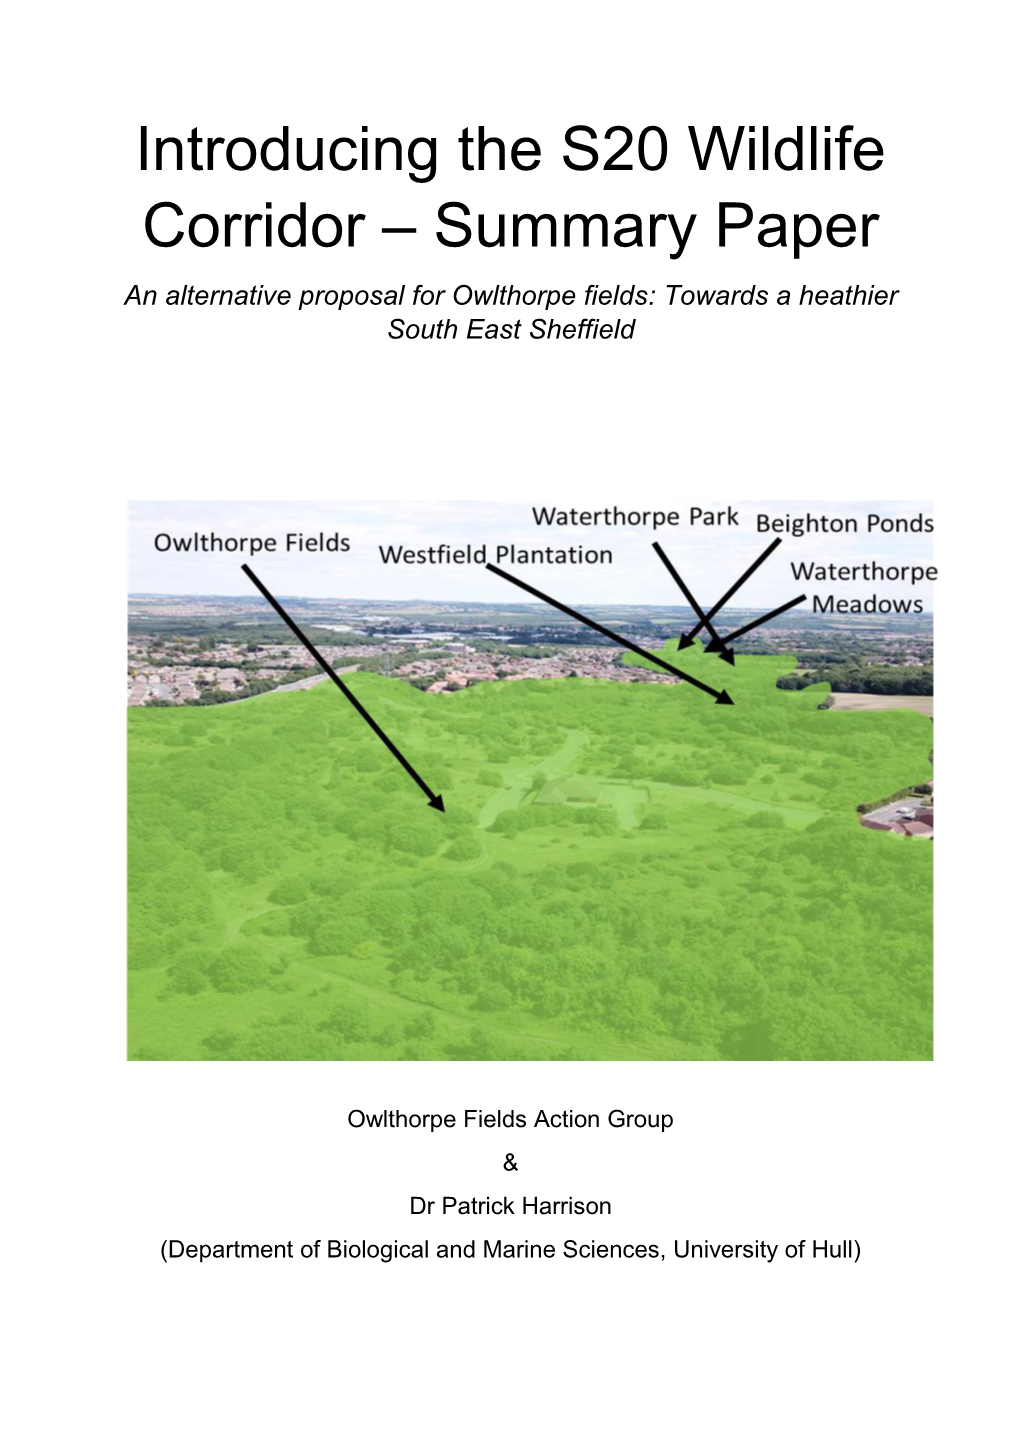 Introducing the S20 Wildlife Corridor – Summary Paper an Alternative Proposal for Owlthorpe Fields: Towards a Heathier South East Sheffield